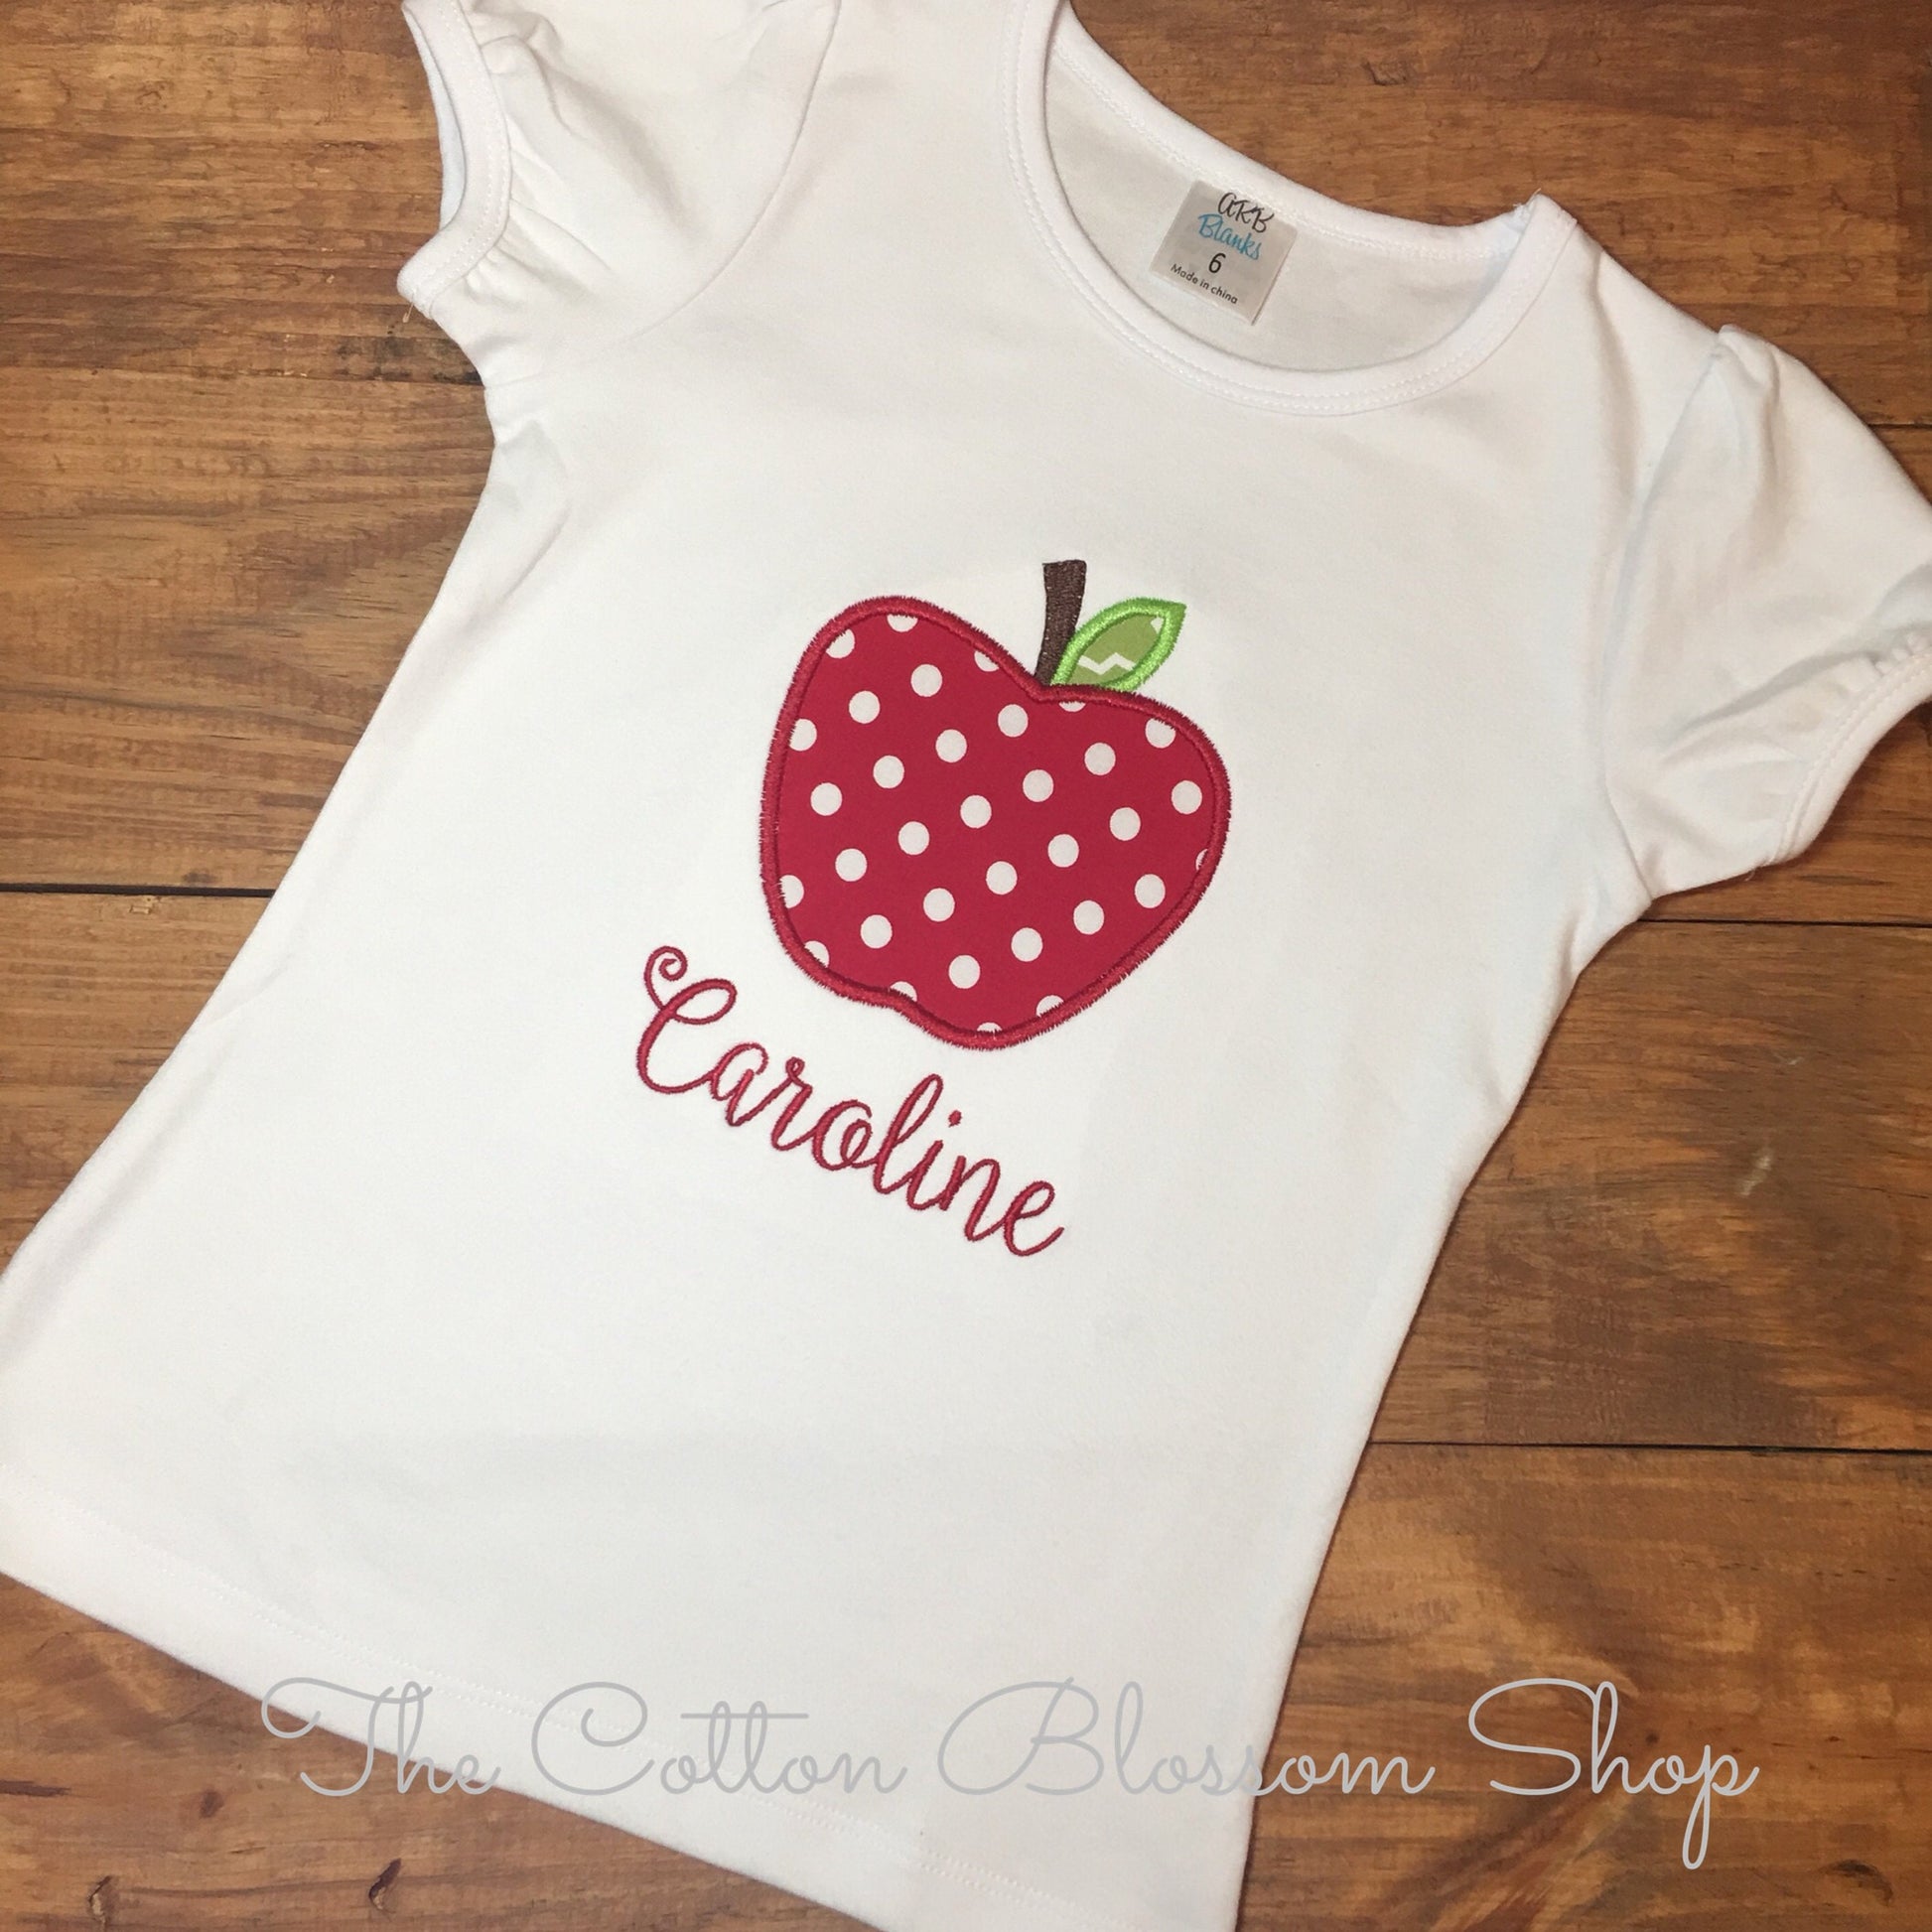 monogrammed apple shirt, Fast Shipping, girls back to School outfit, personalized apple shirt, monogrammed apple shirt, back to school